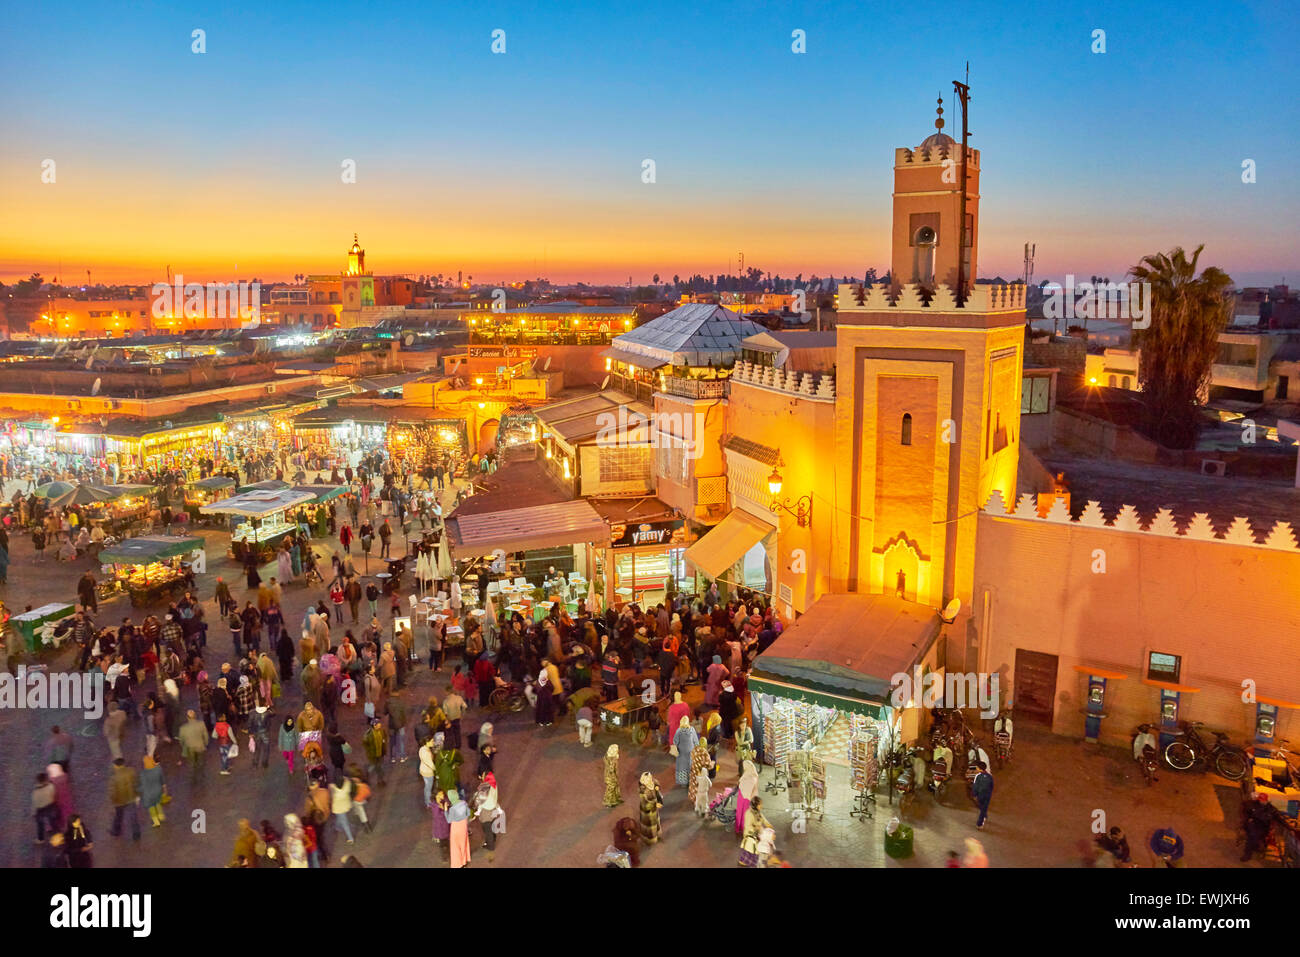 Djemaa el-Fna square at dusk, Marrakech, Morocco, Africa Stock Photo